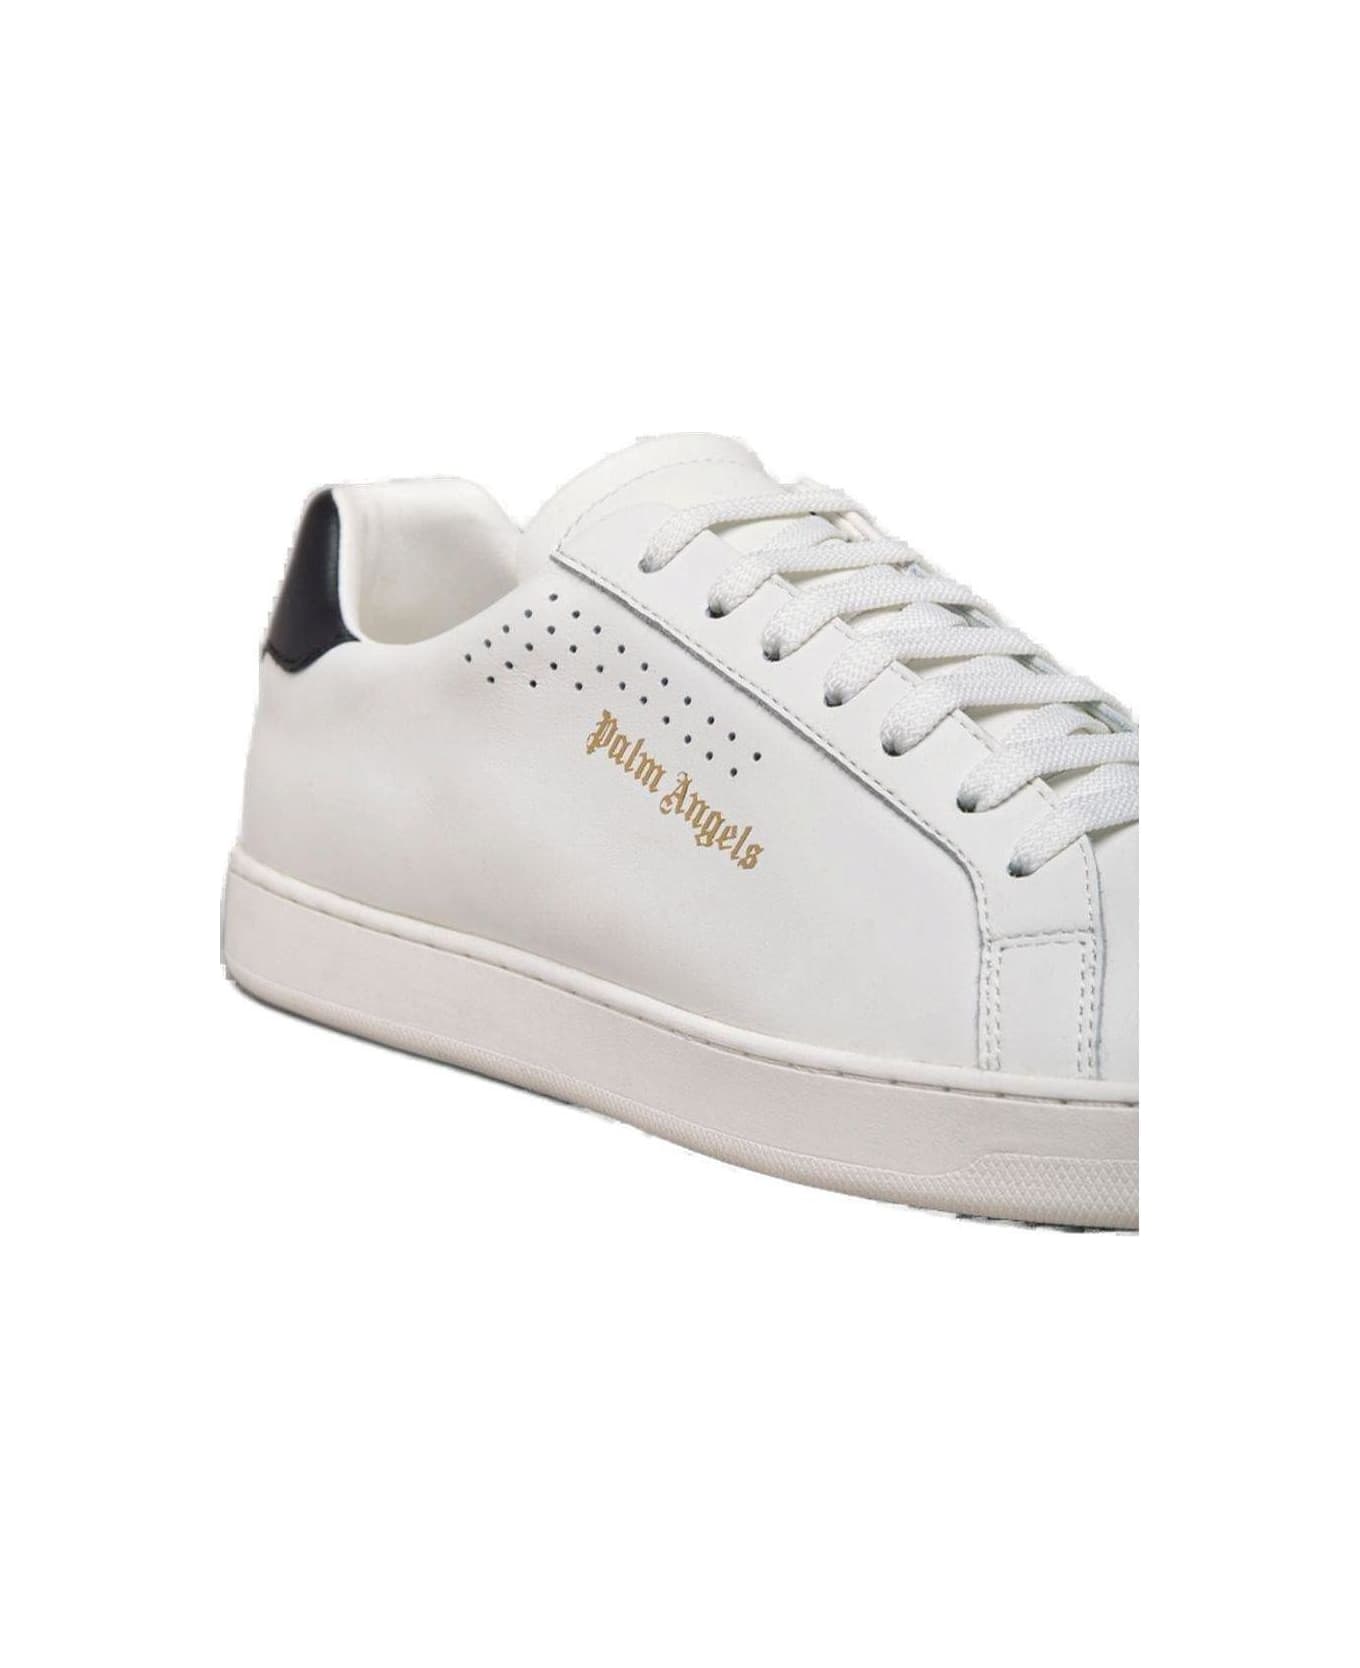 Palm Angels Leather Logo Sneakers - White スニーカー